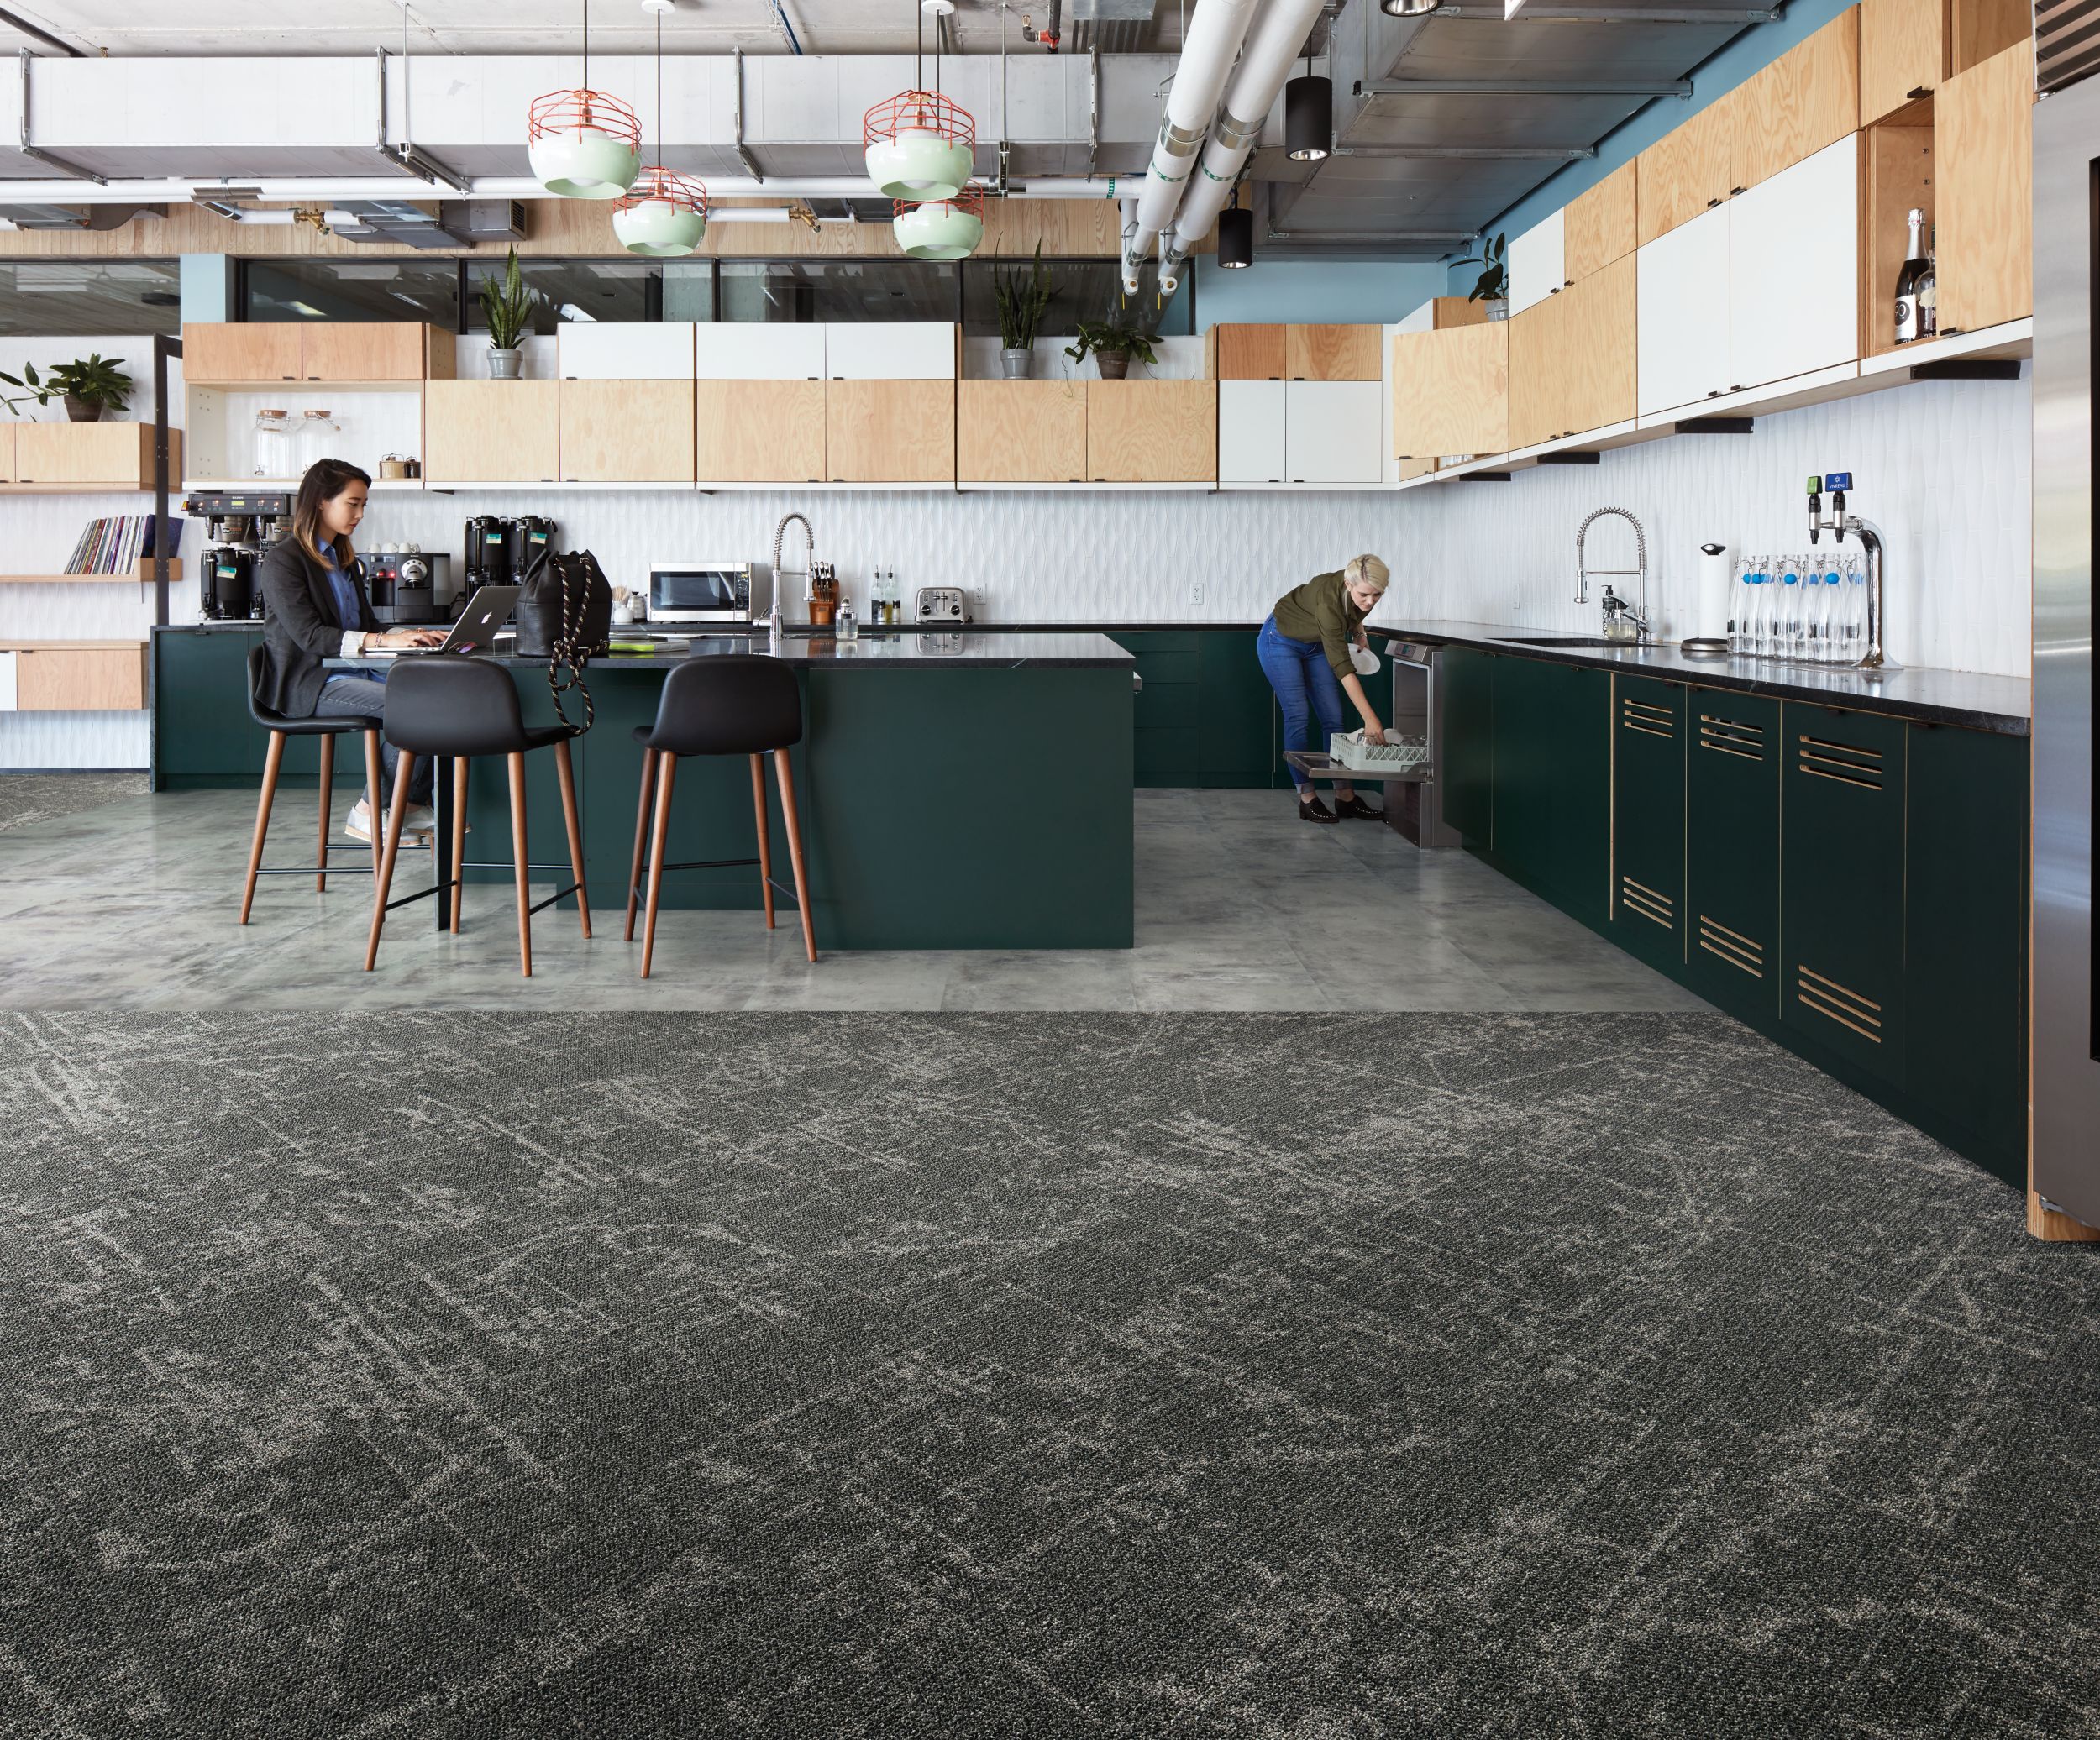 Interface Ice Breaker carpet tile and Textured Stones LVT in kitchen area with women lodaing dish washer and women working on computer numéro d’image 7